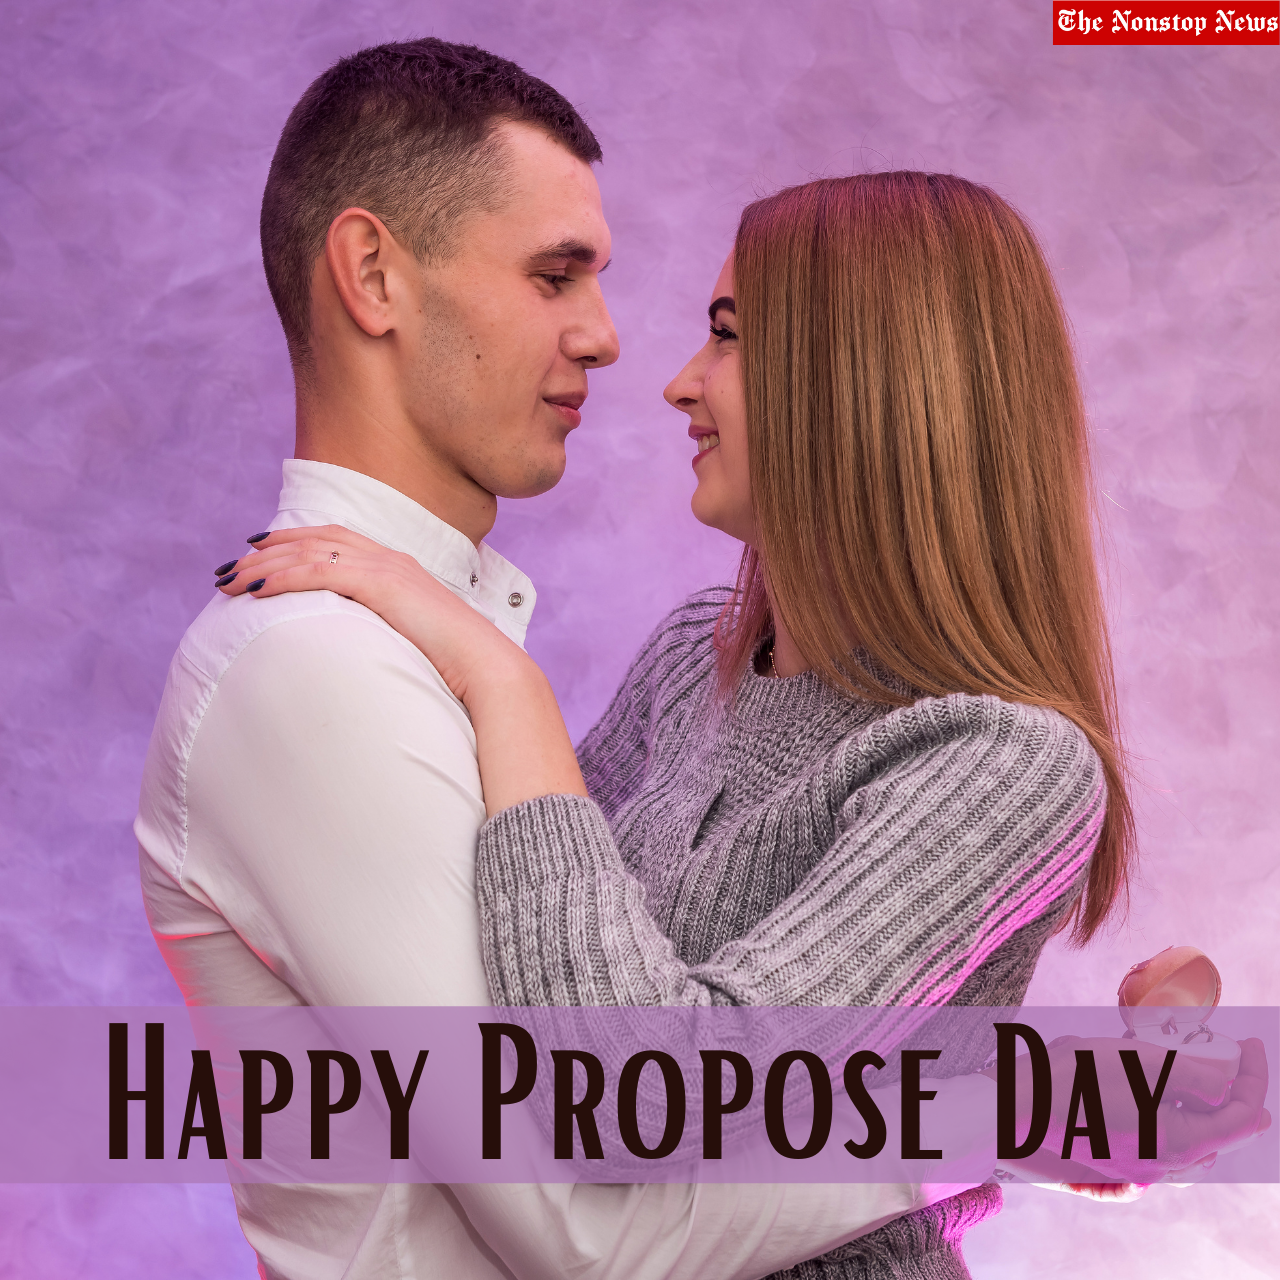 Propose Day 2022: Wishes, Quotes, HD Images, Messages, Status, Shayari to greet your love on the 2nd day of Valentine's week